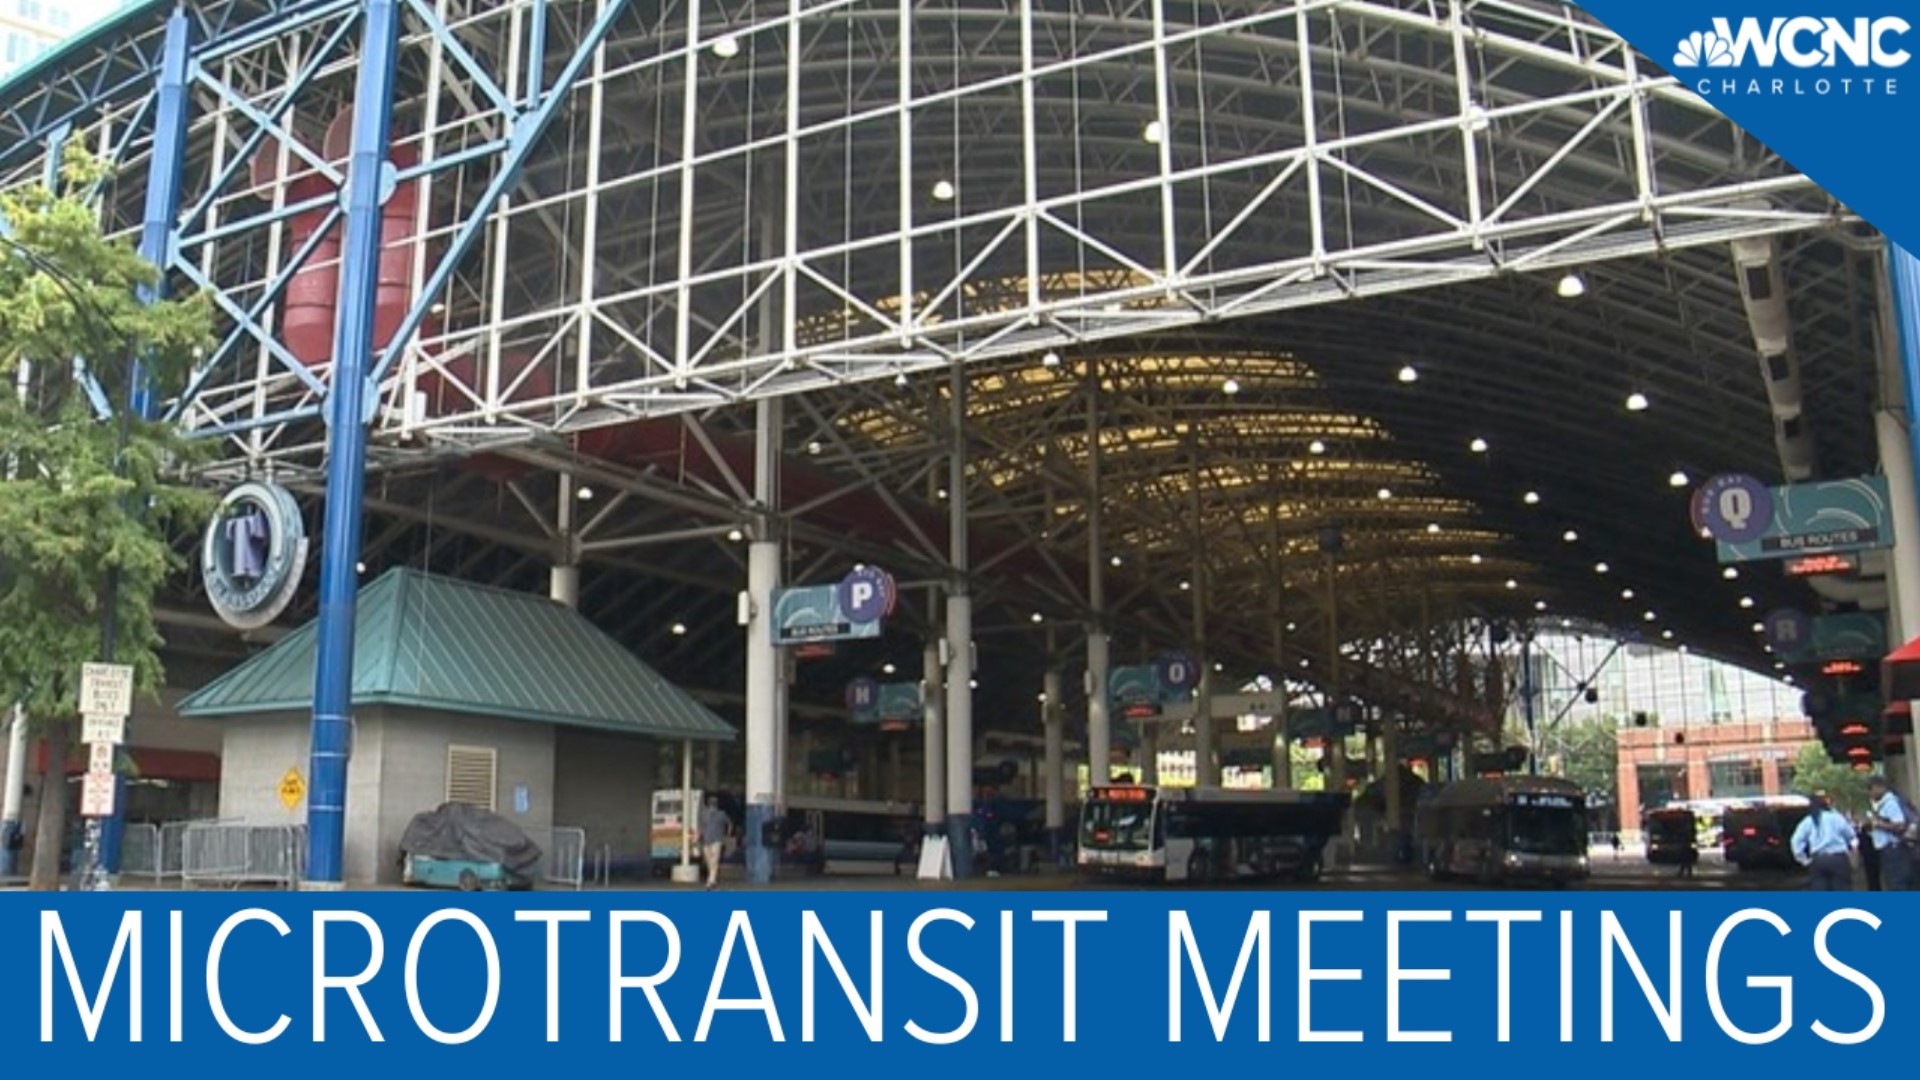 The Charlotte Area Transit System (CATS) is hosting multiple meetings in March to hear from the public on its microtransit initiative.